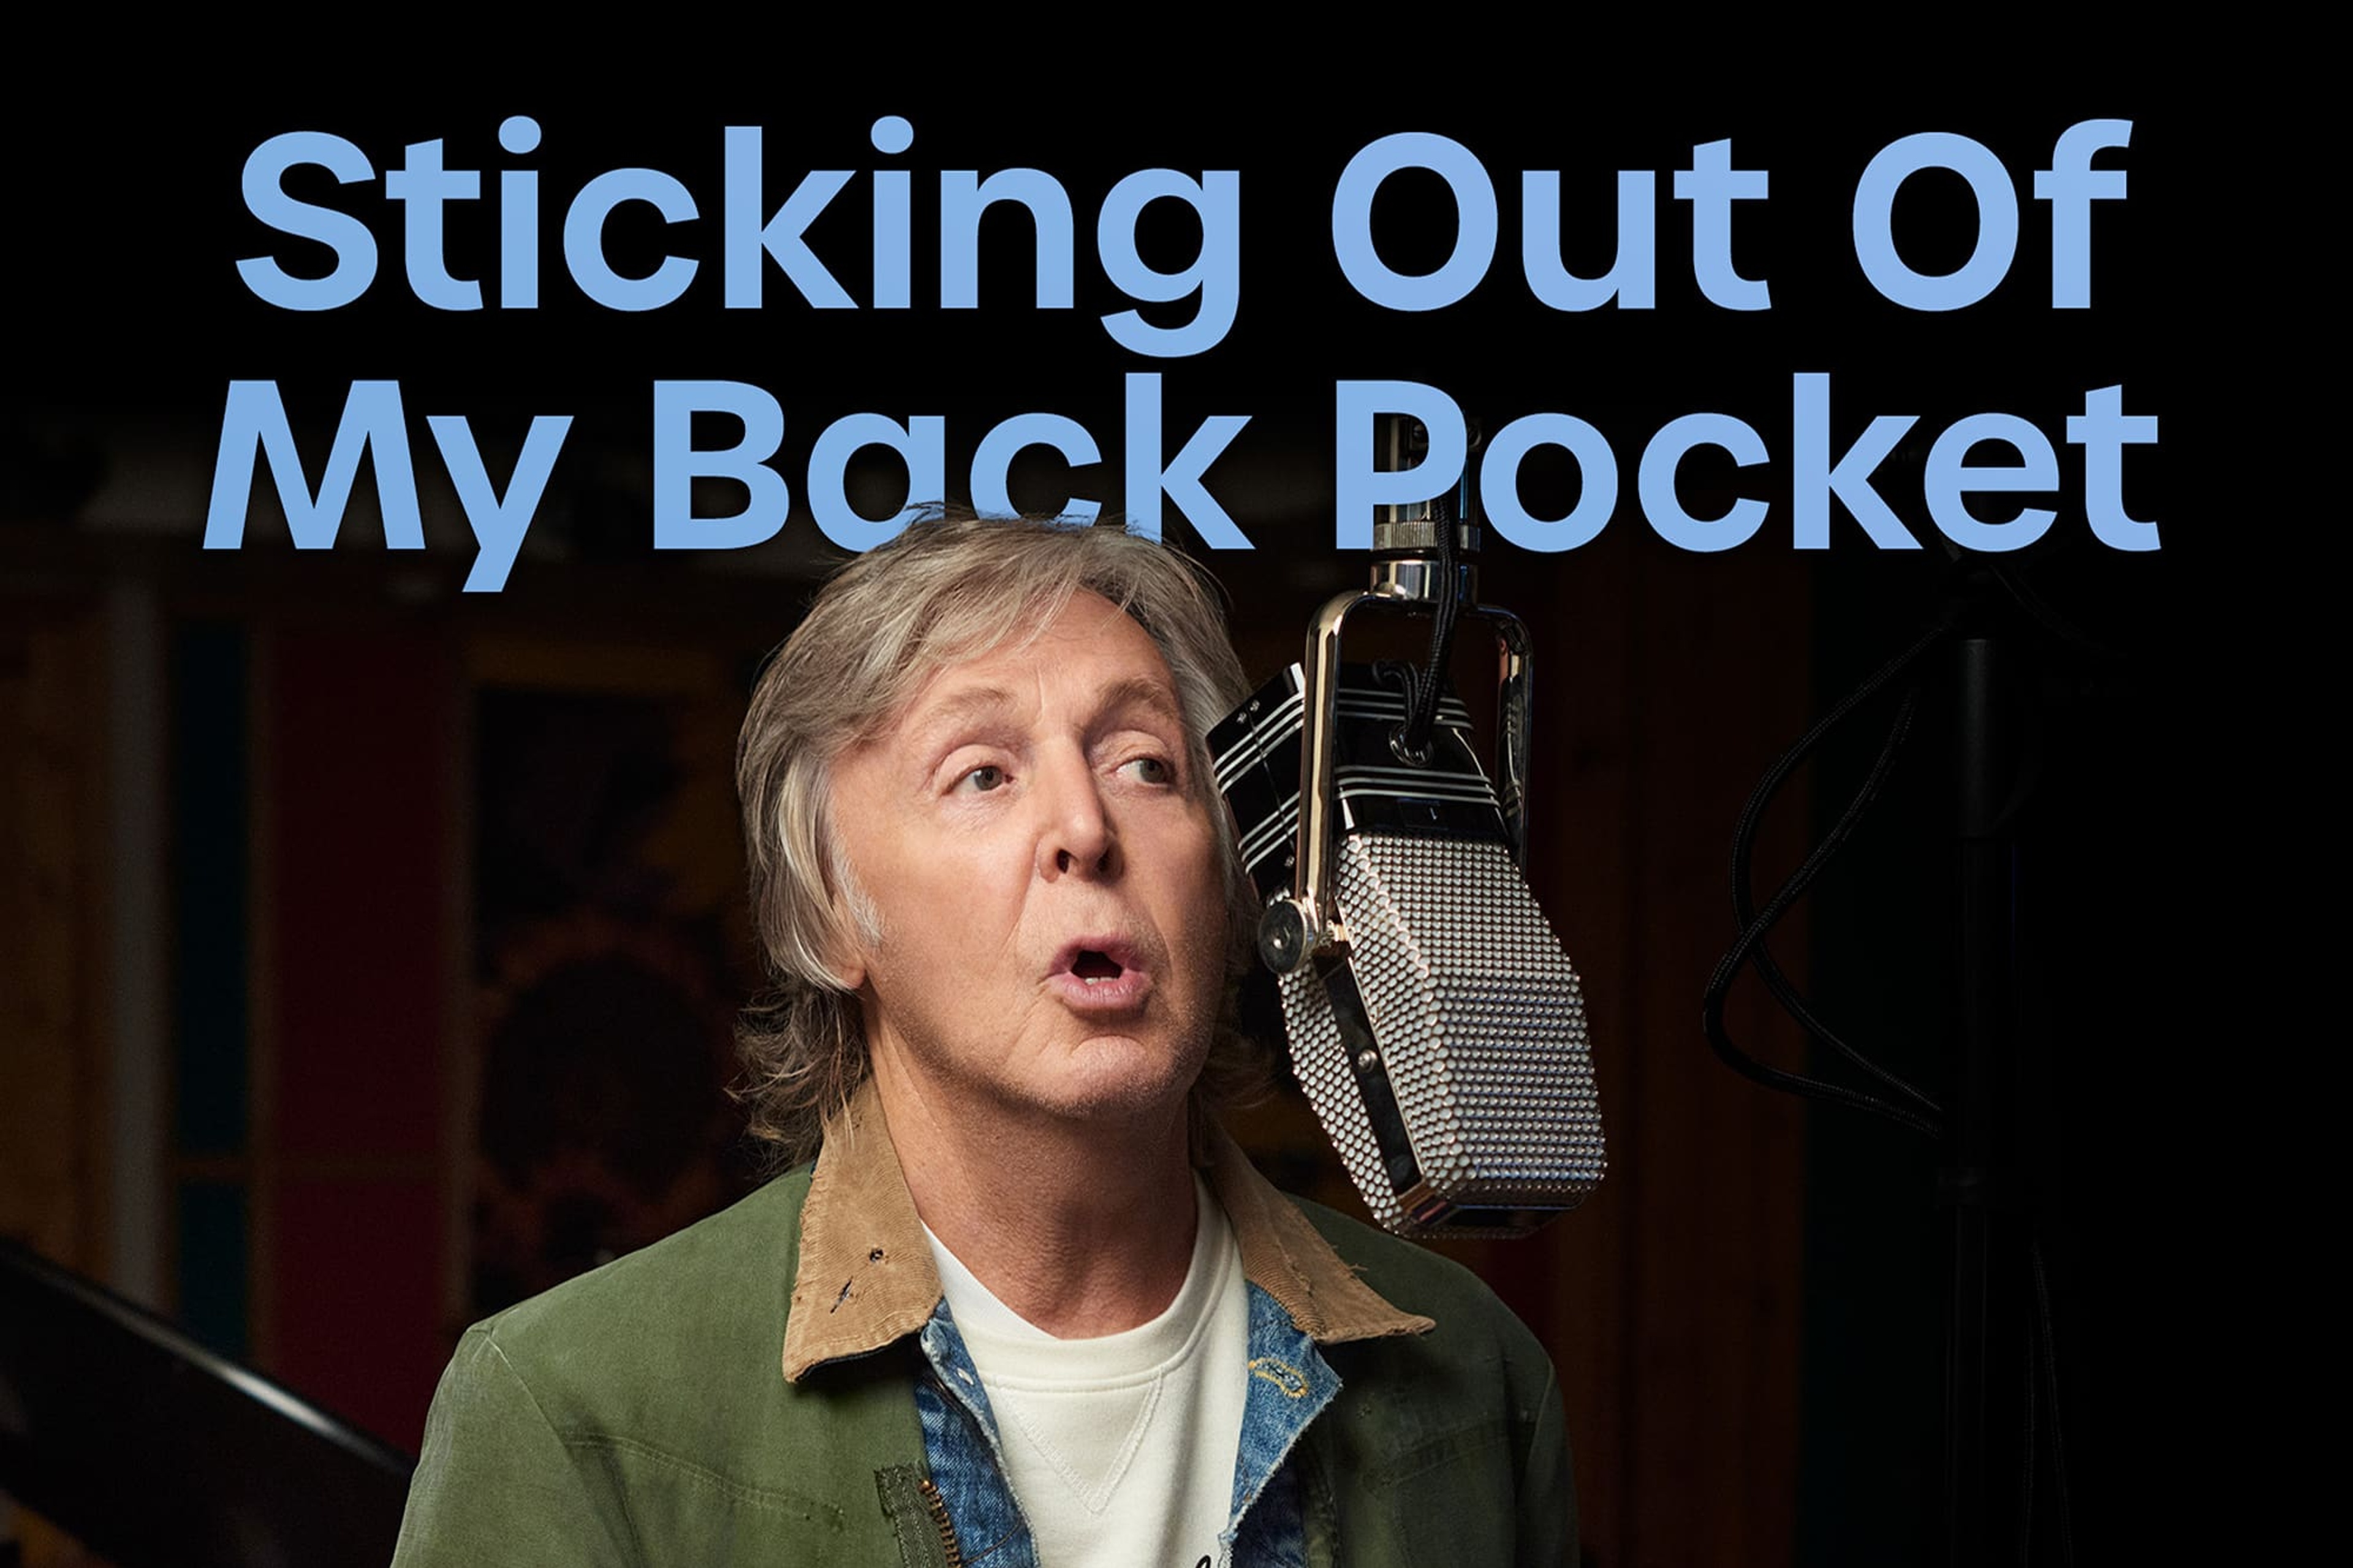 Photo of Paul McCartney in the studio with 'Sticking Out Of My Back Pocket' text across it.